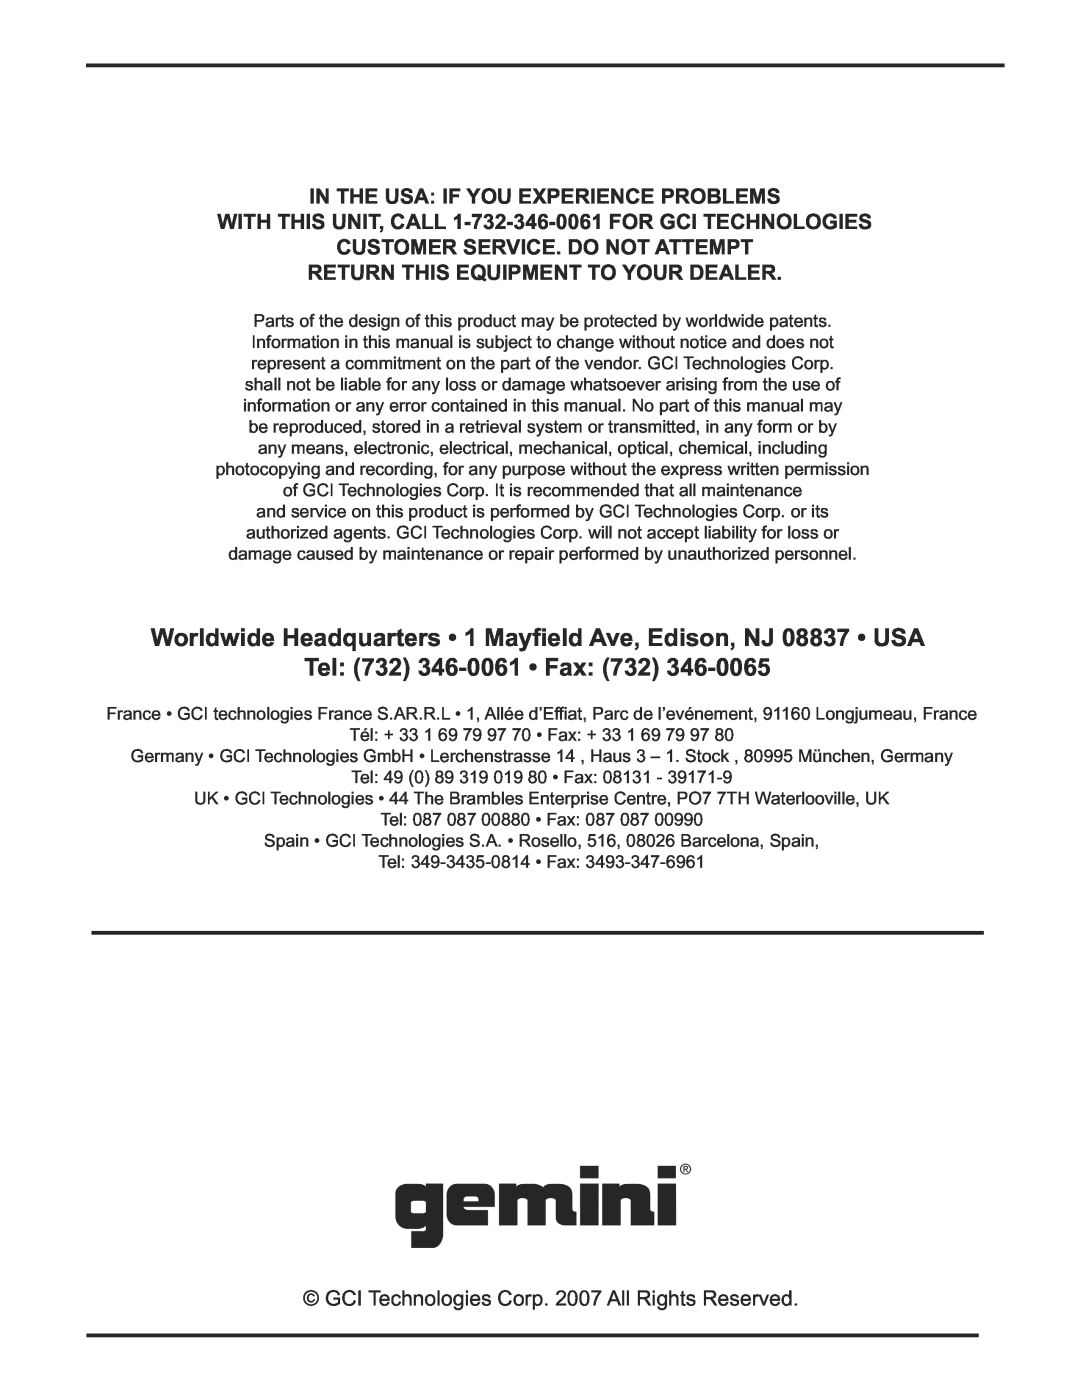 Gemini CDX-1250 manual Tel 732 346-0061 Fax, In The Usa If You Experience Problems, Customer Service. Do Not Attempt 